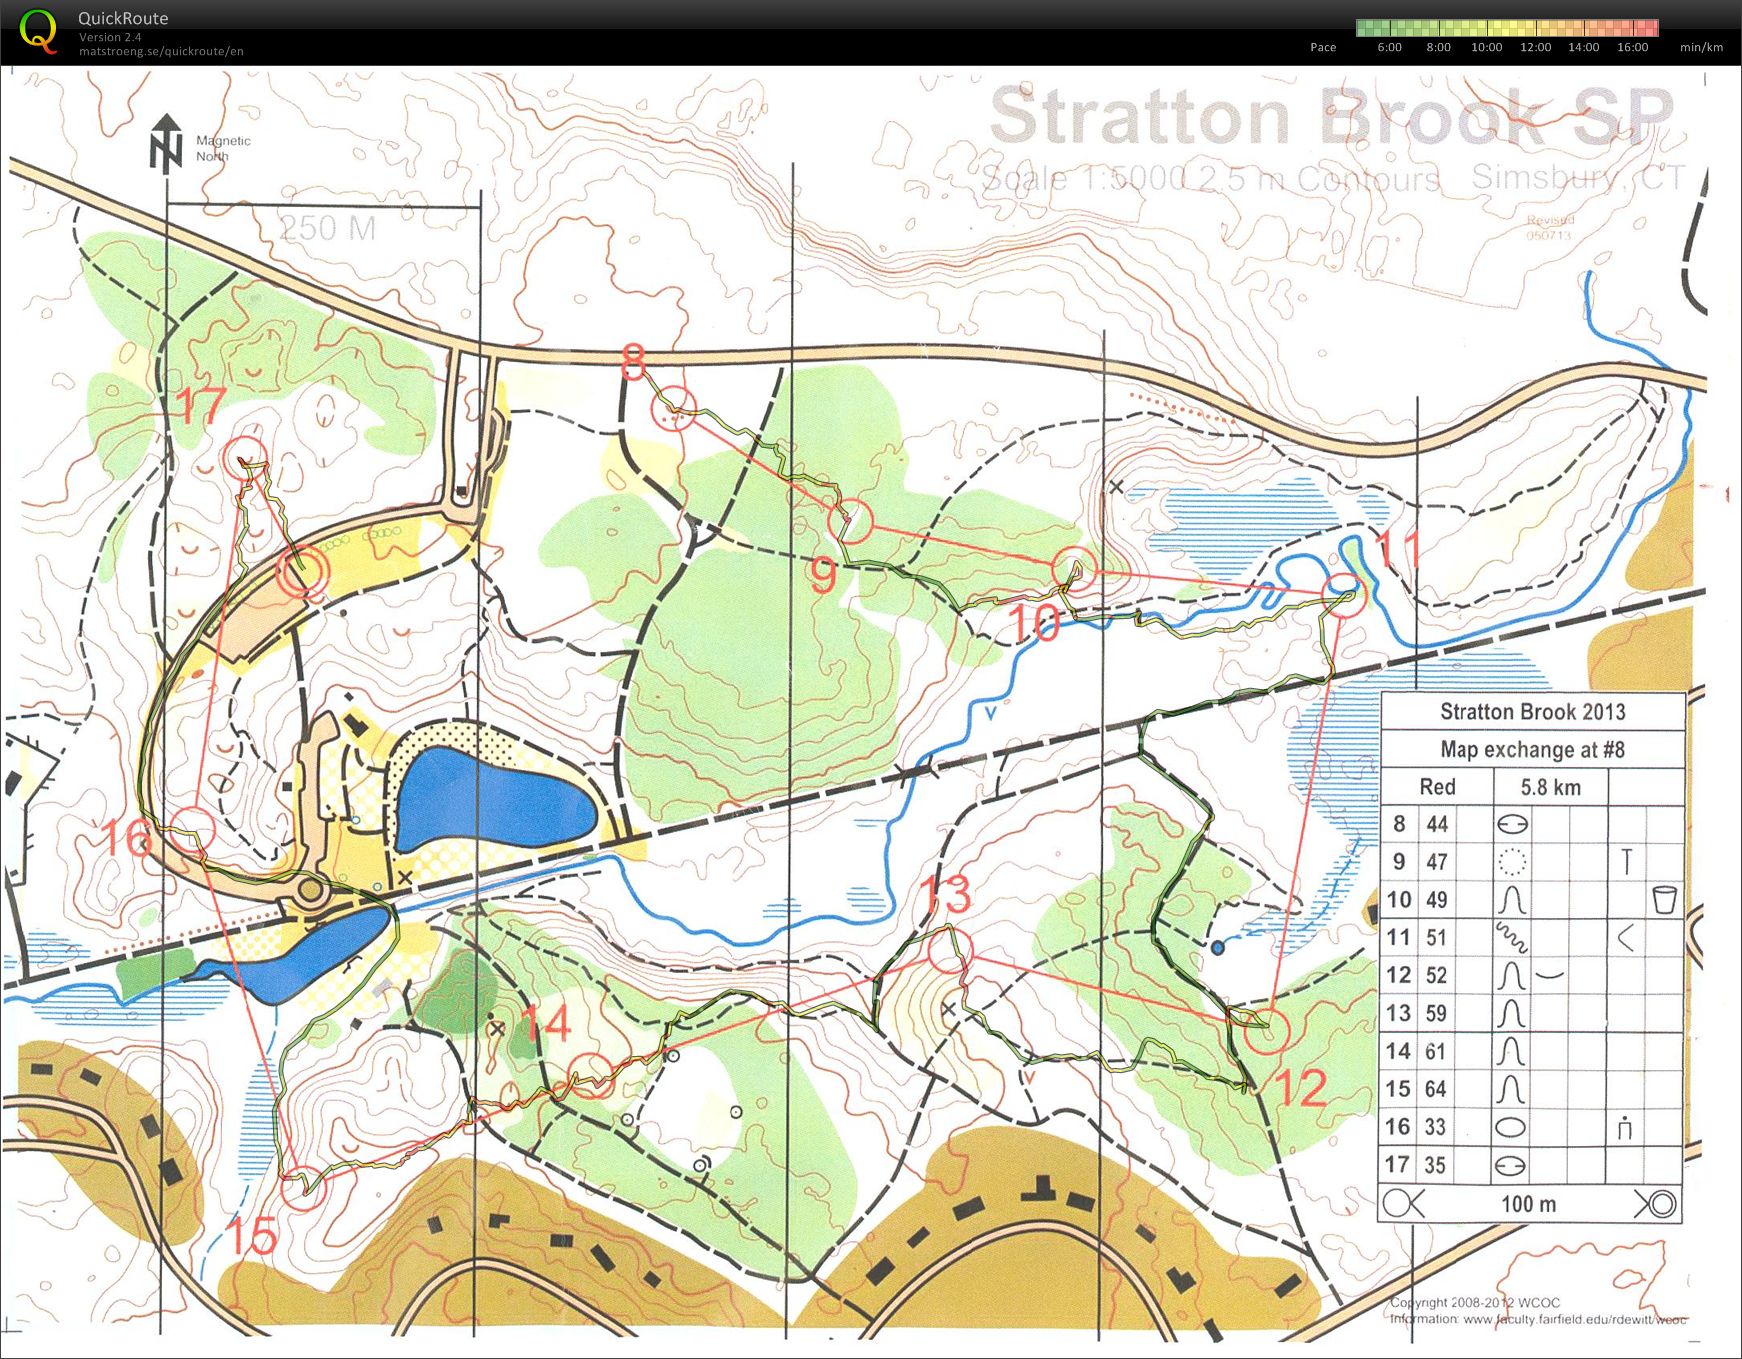 Stratton Brook Red Course, Part 2 (19.05.2013)